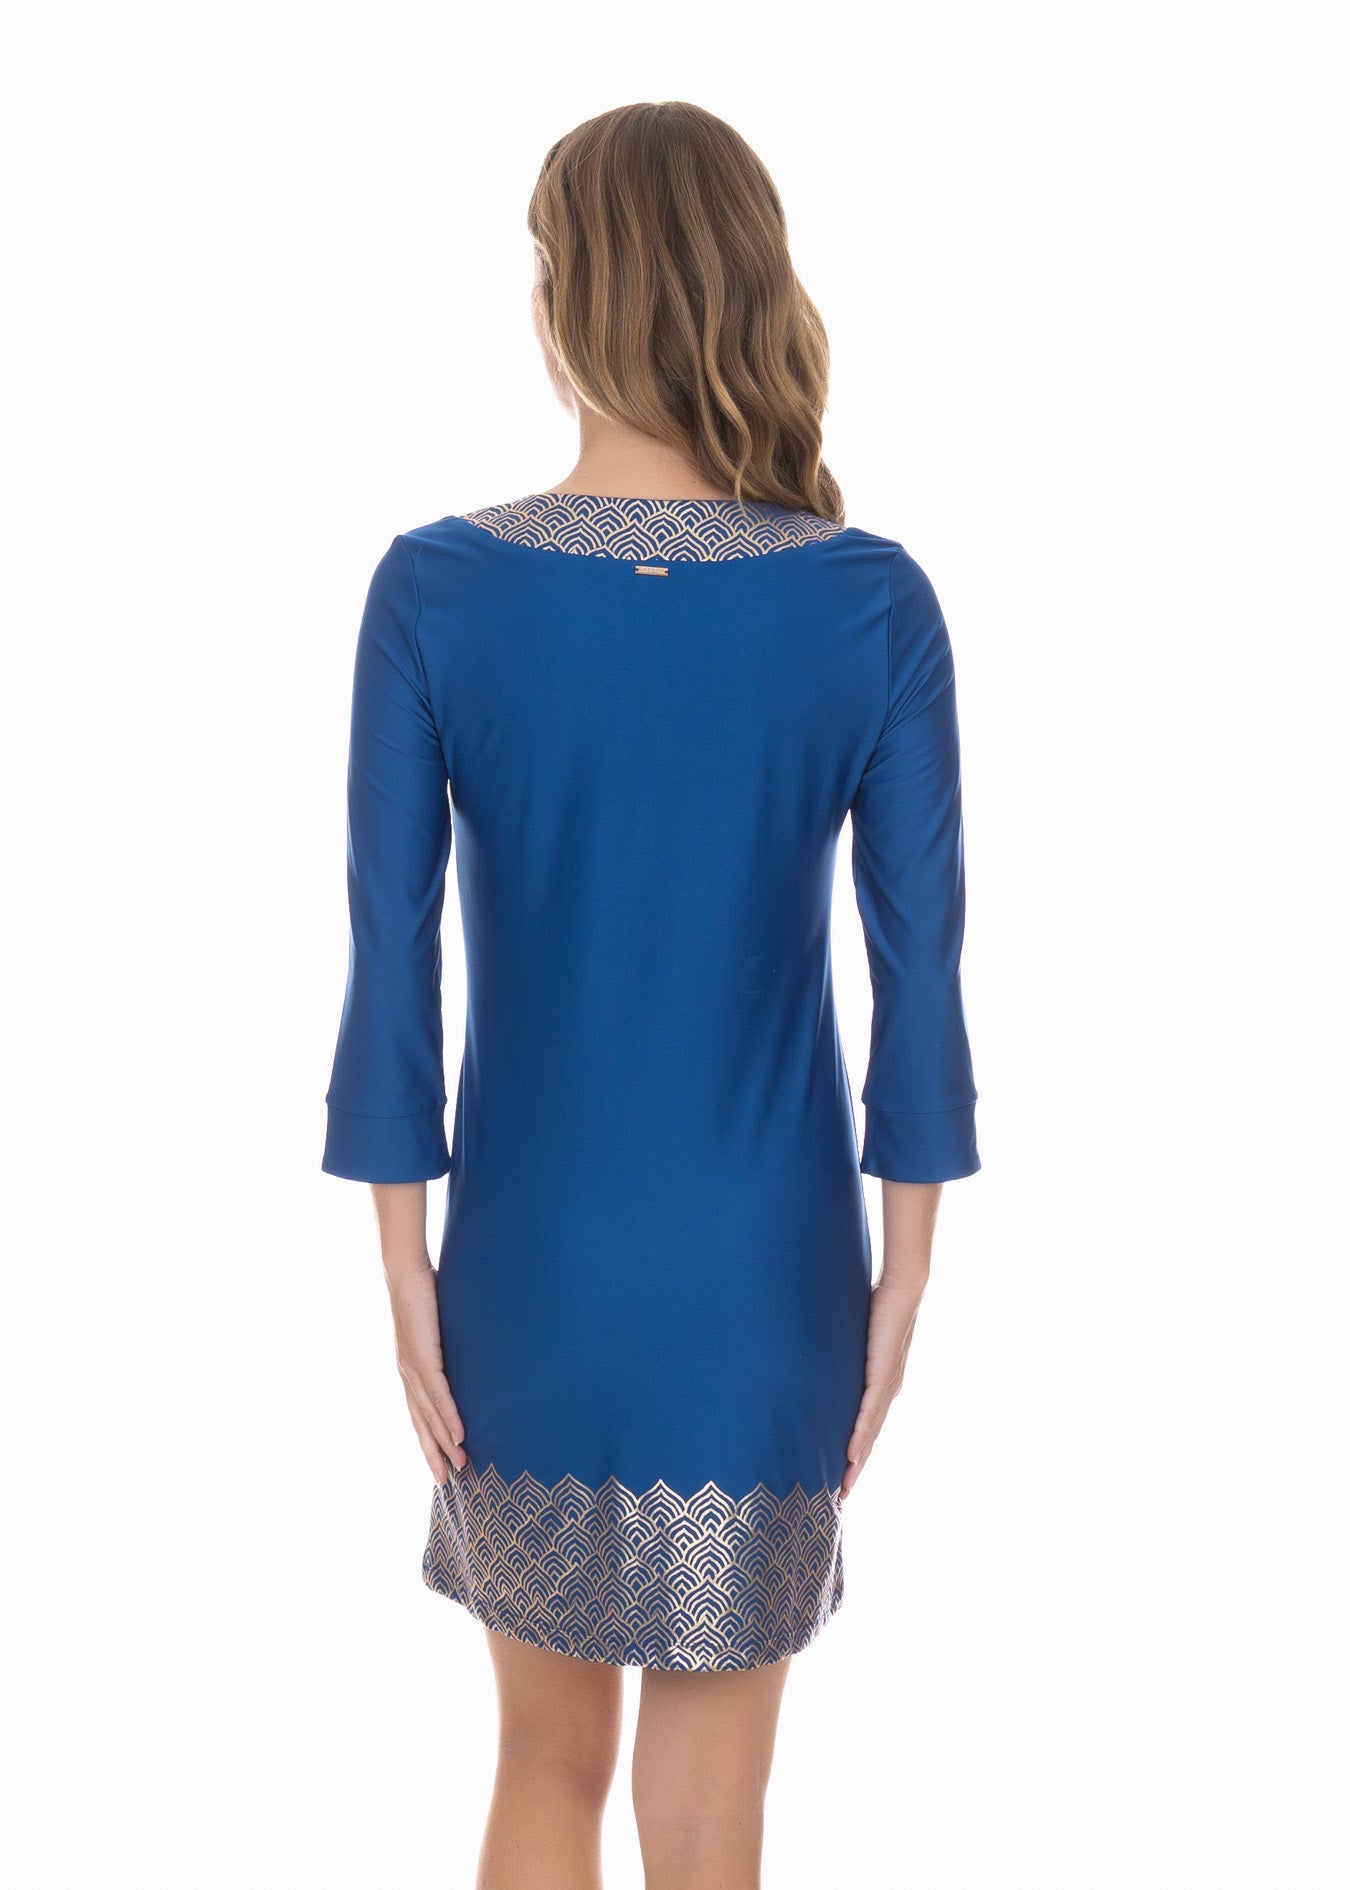 Back facing model wearing the Navy Metallic Tunic Dress in front of white background.